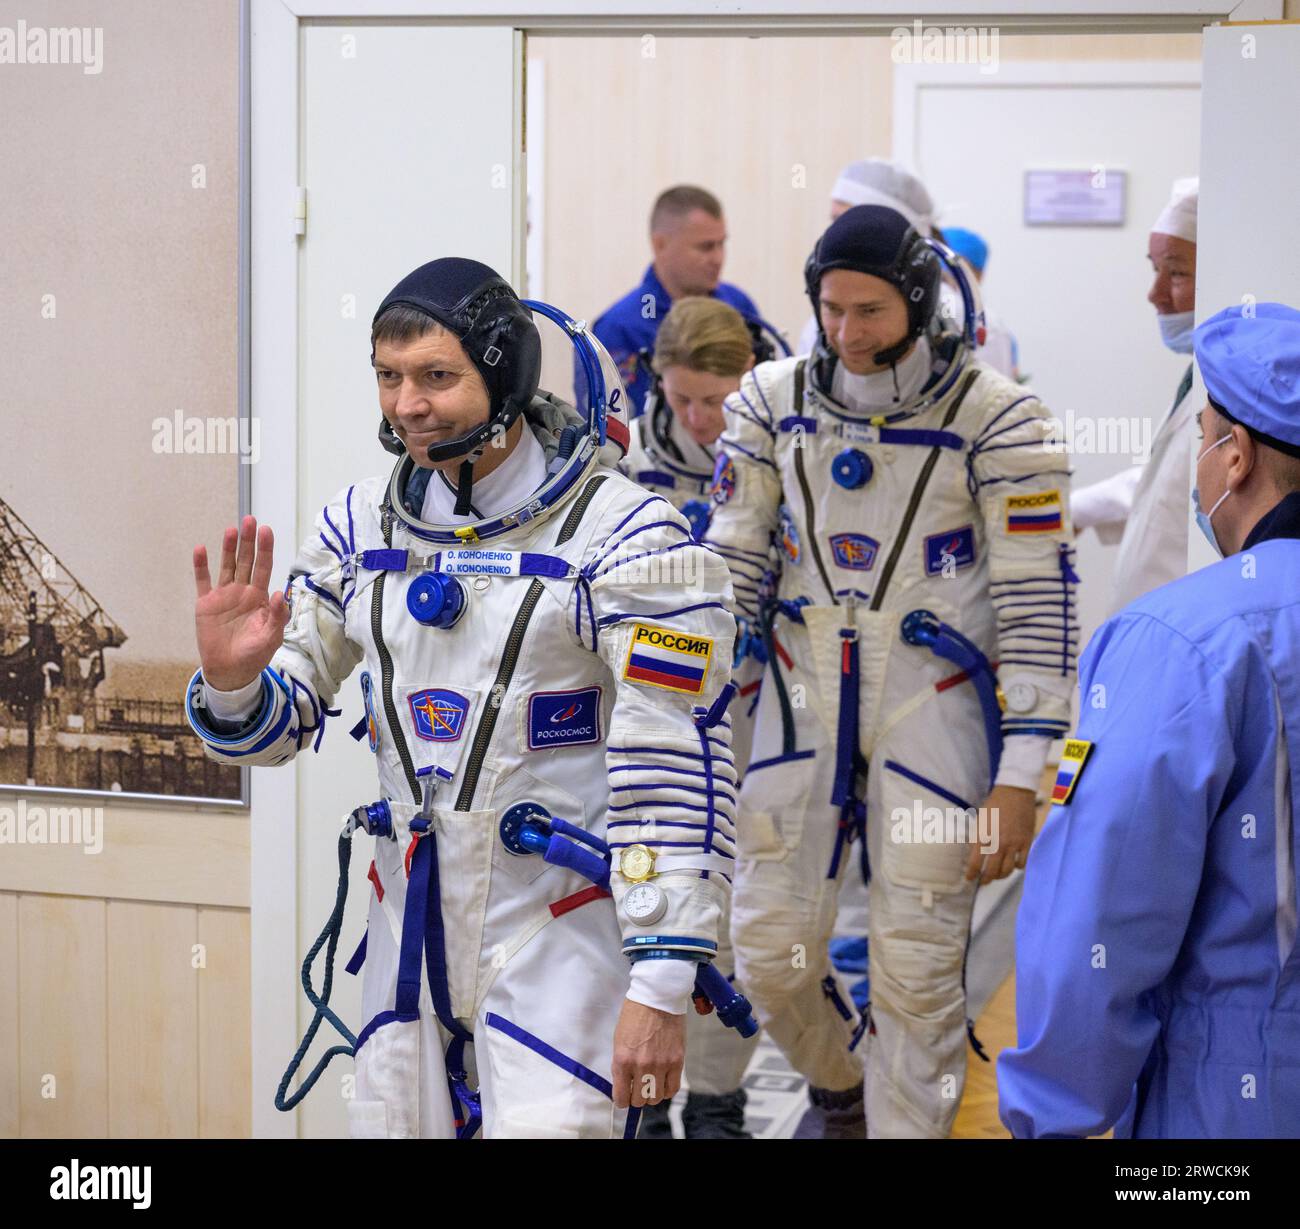 Baikonur , Kazakhstan. 15 September, 2023. Roscosmos cosmonauts Oleg Kononenko, left, Nikolai Chub, center, and NASA astronaut Loral O'Hara, right, enter the pressure check room in their Sokol spacesuits during preparations for launch aboard the Russian Soyuz MS-24 spacecraft at the Baikonur Cosmodrome, September 15, 2023 in Baikonur, Kazakhstan. Expedition 70 crew members Loral O'Hara, and cosmonauts Oleg Kononenko, and Nikolai Chub of Roscosmos depart for the International Space Station.  Credit: Bill Ingalls/NASA/Alamy Live News Stock Photo